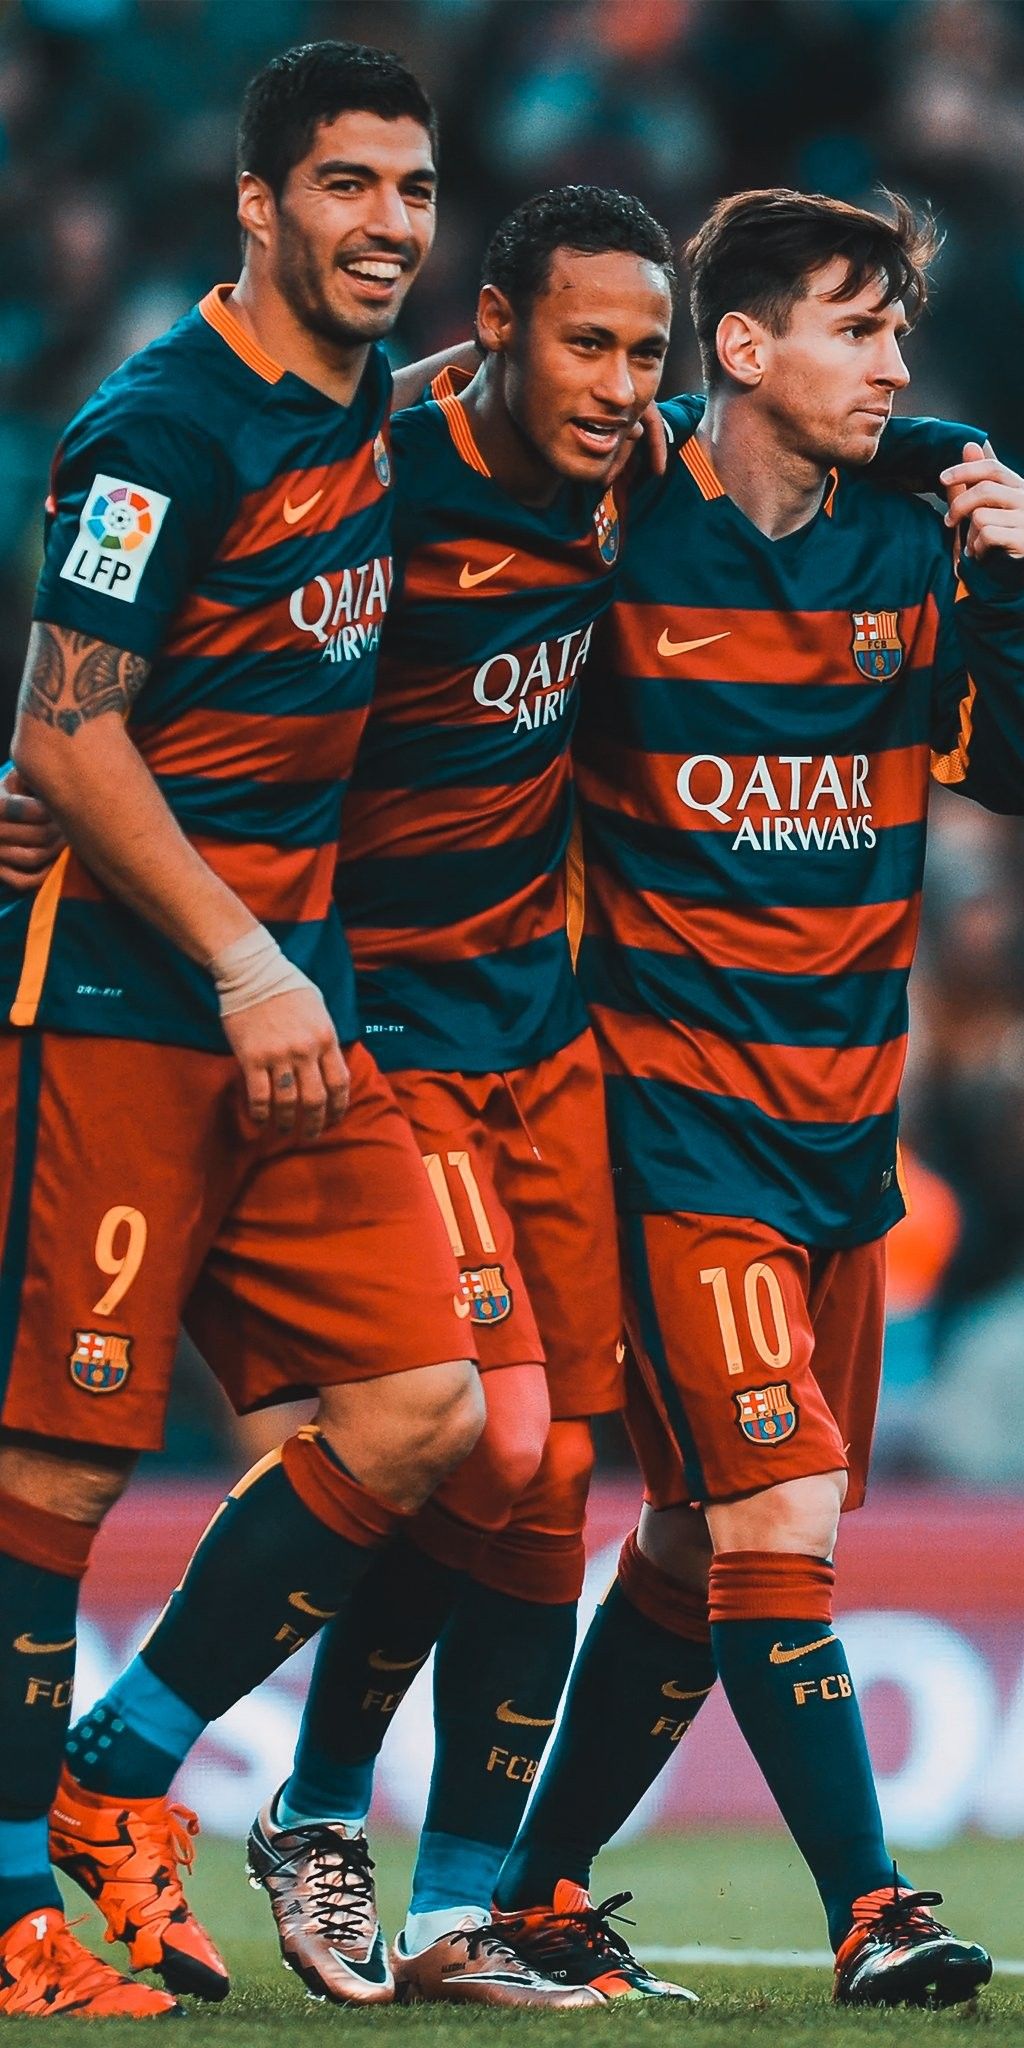 A D I L on Twitter. Messi soccer, Messi and neymar, Lionel messi barcelona